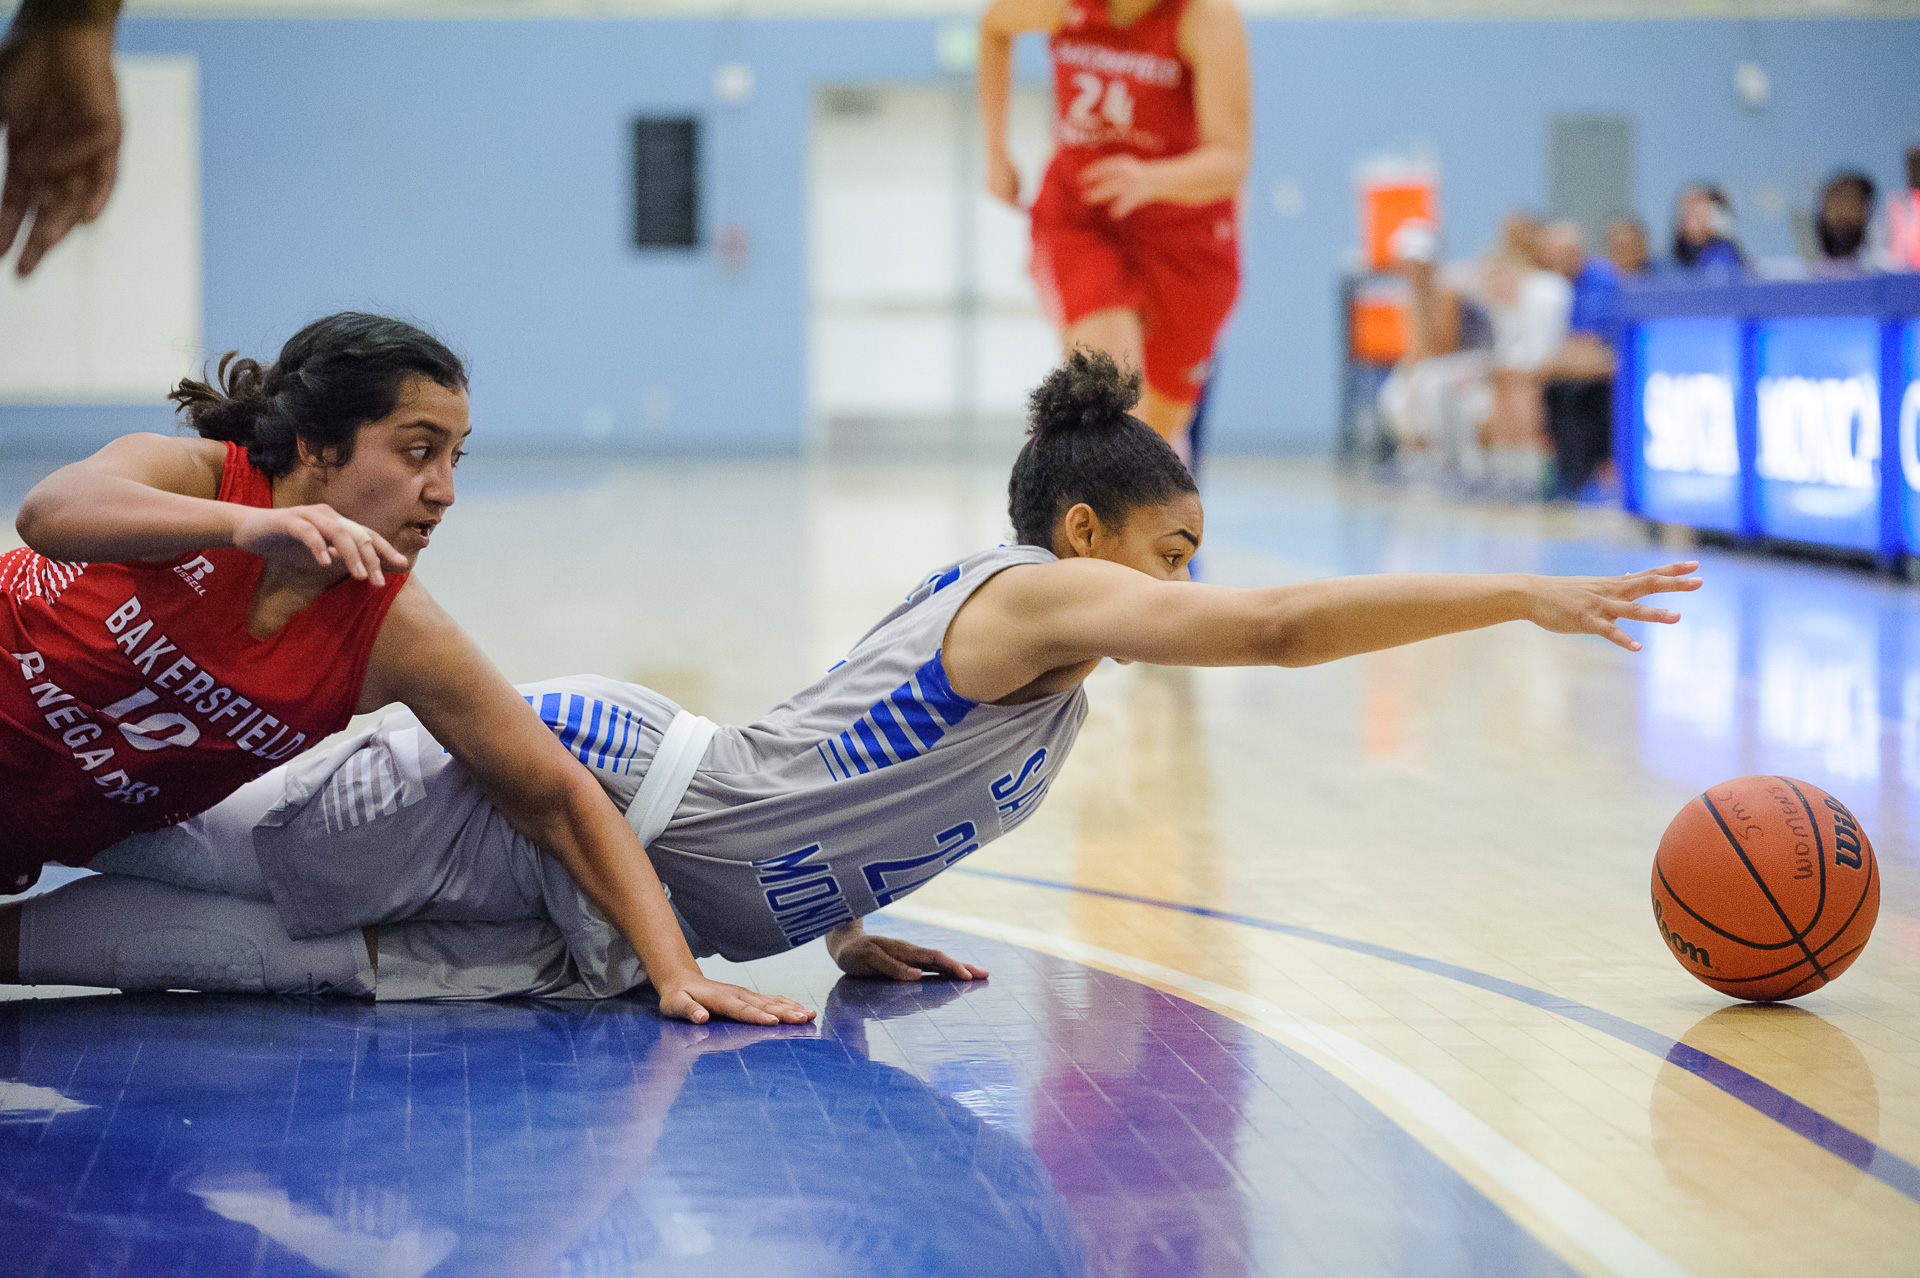  Guard Jinea Cole (22,Right) of Santa Monica College dives for a loose ball against Belen Rivera (10,Left) of Bakersfield College. The Santa Monica College Corsairs lose the game 62-72 to the Bakersfield College Renegades. The game was held at the SM